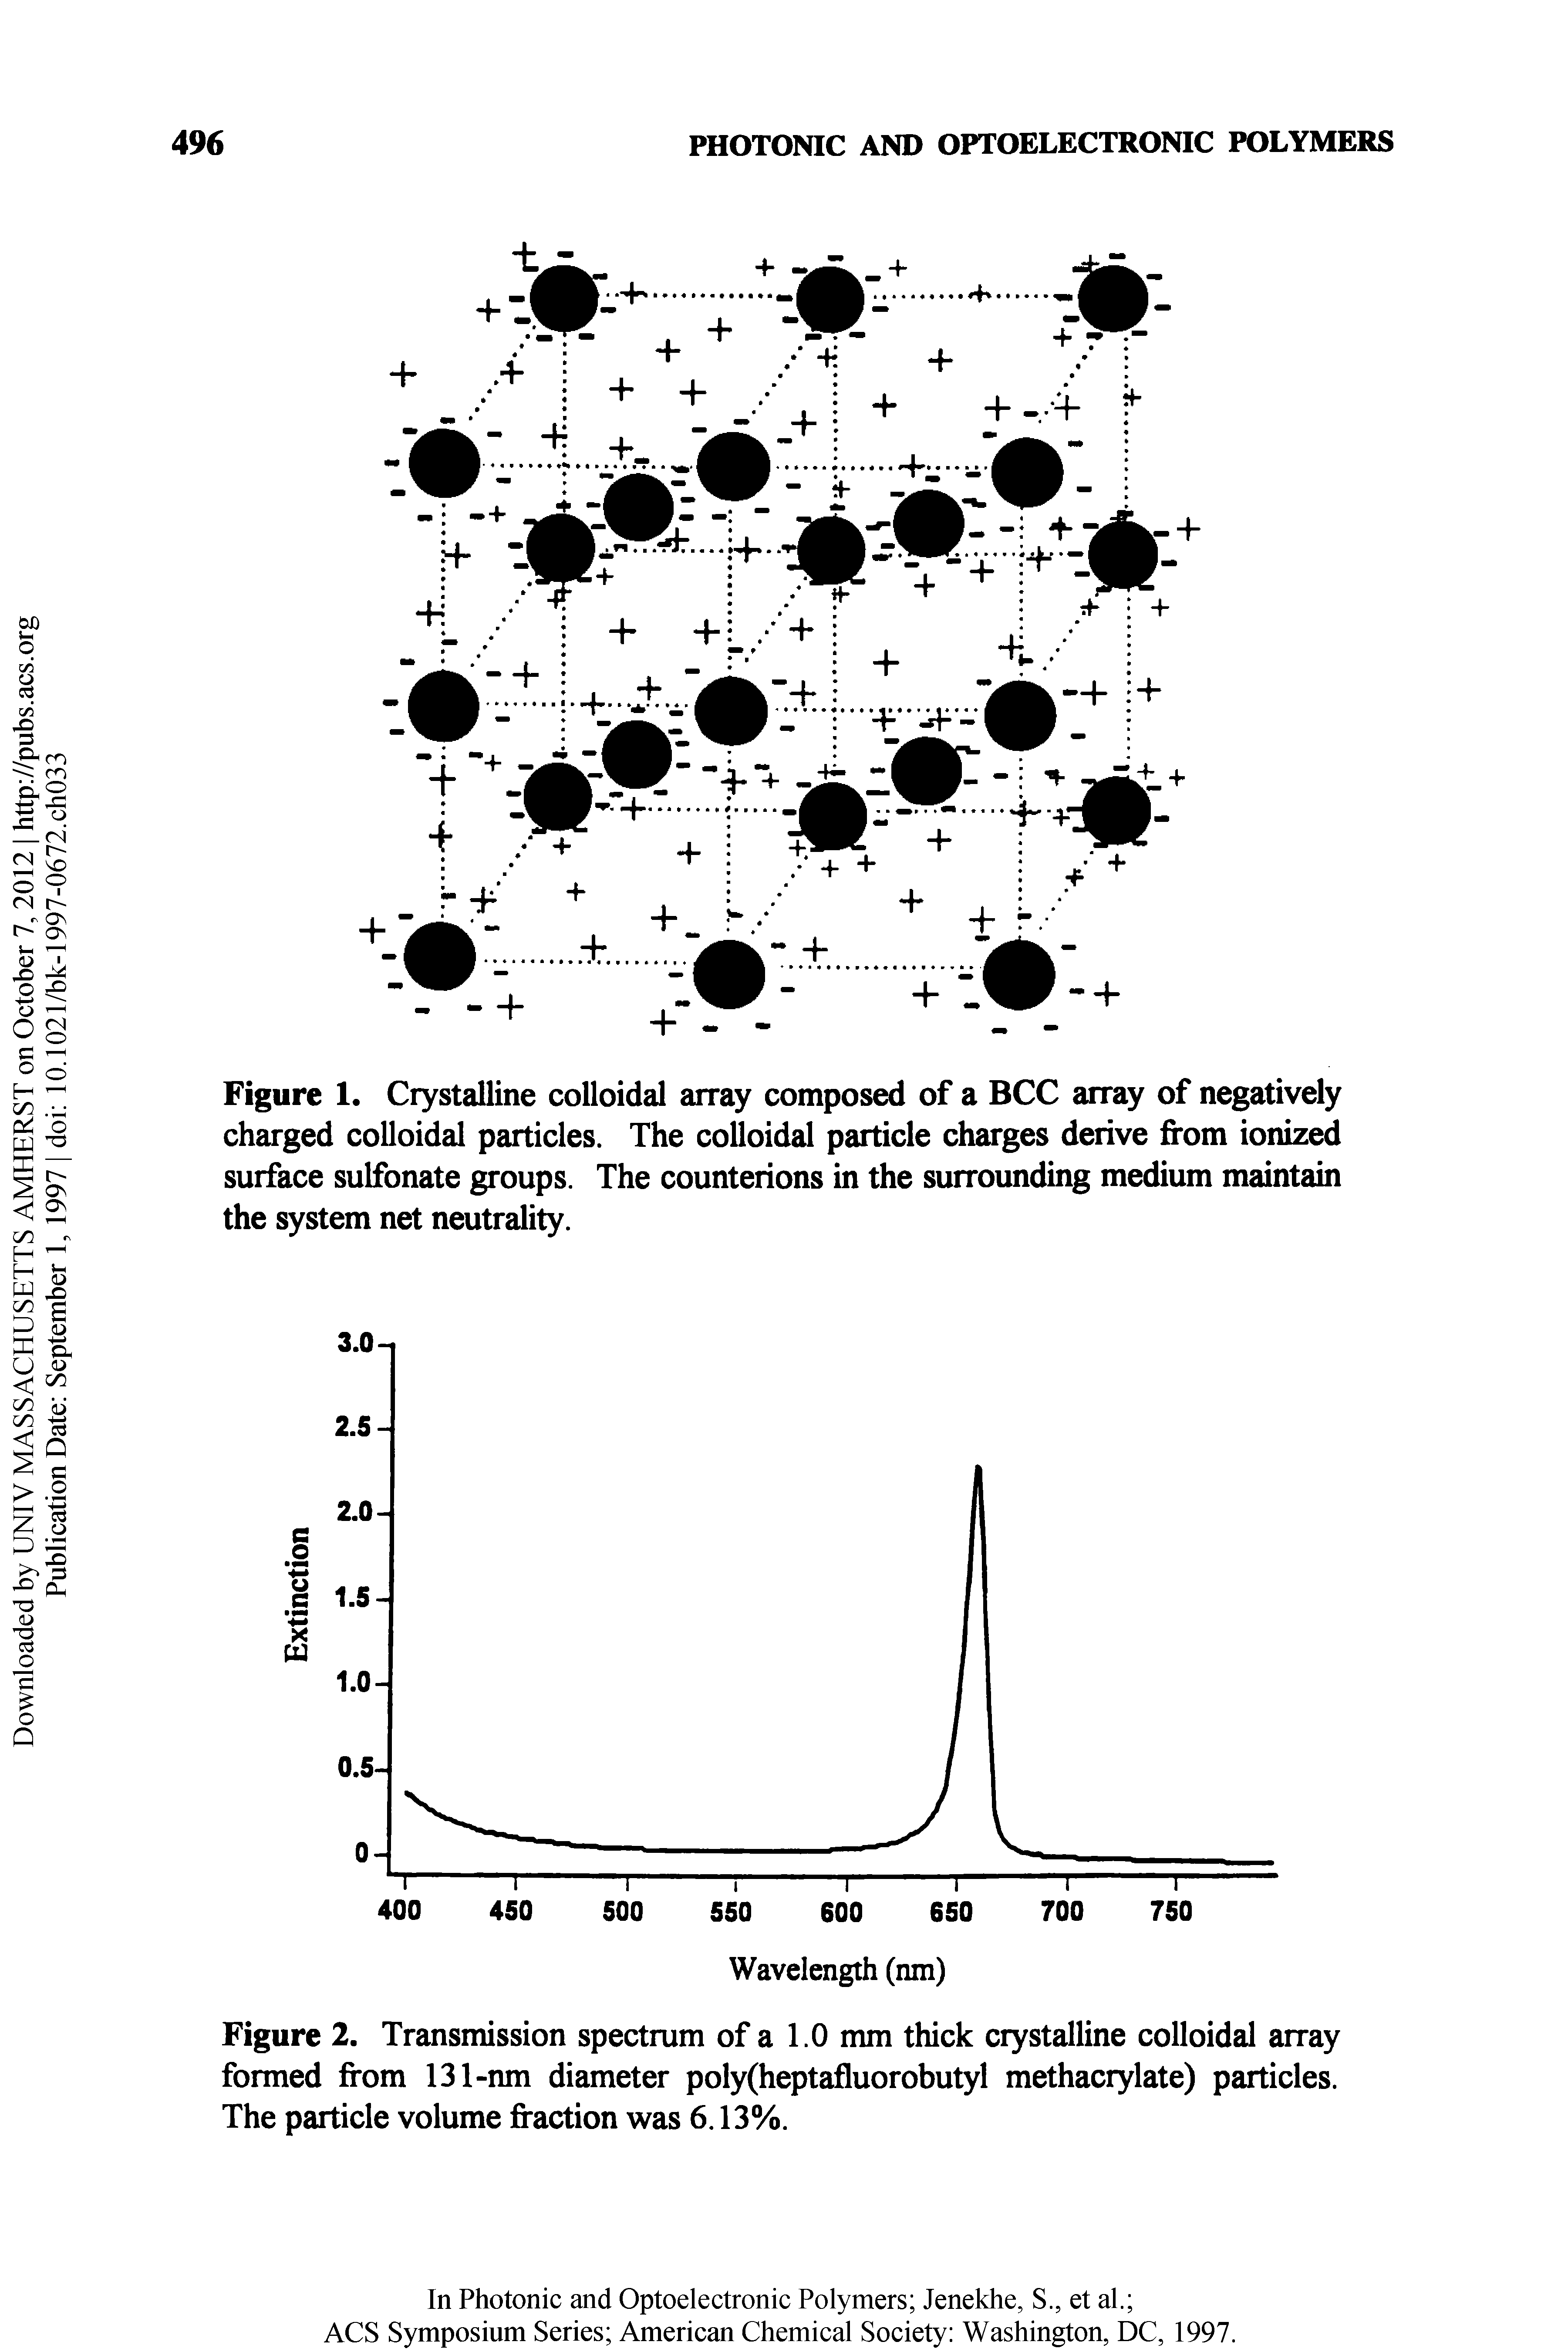 Figure 2. Transmission spectrum of a 1.0 mm thick crystalline colloidal array formed from 131-nm diameter poly(heptafluorobutyl methacrylate) particles. The particle volume fraction was 6.13%.